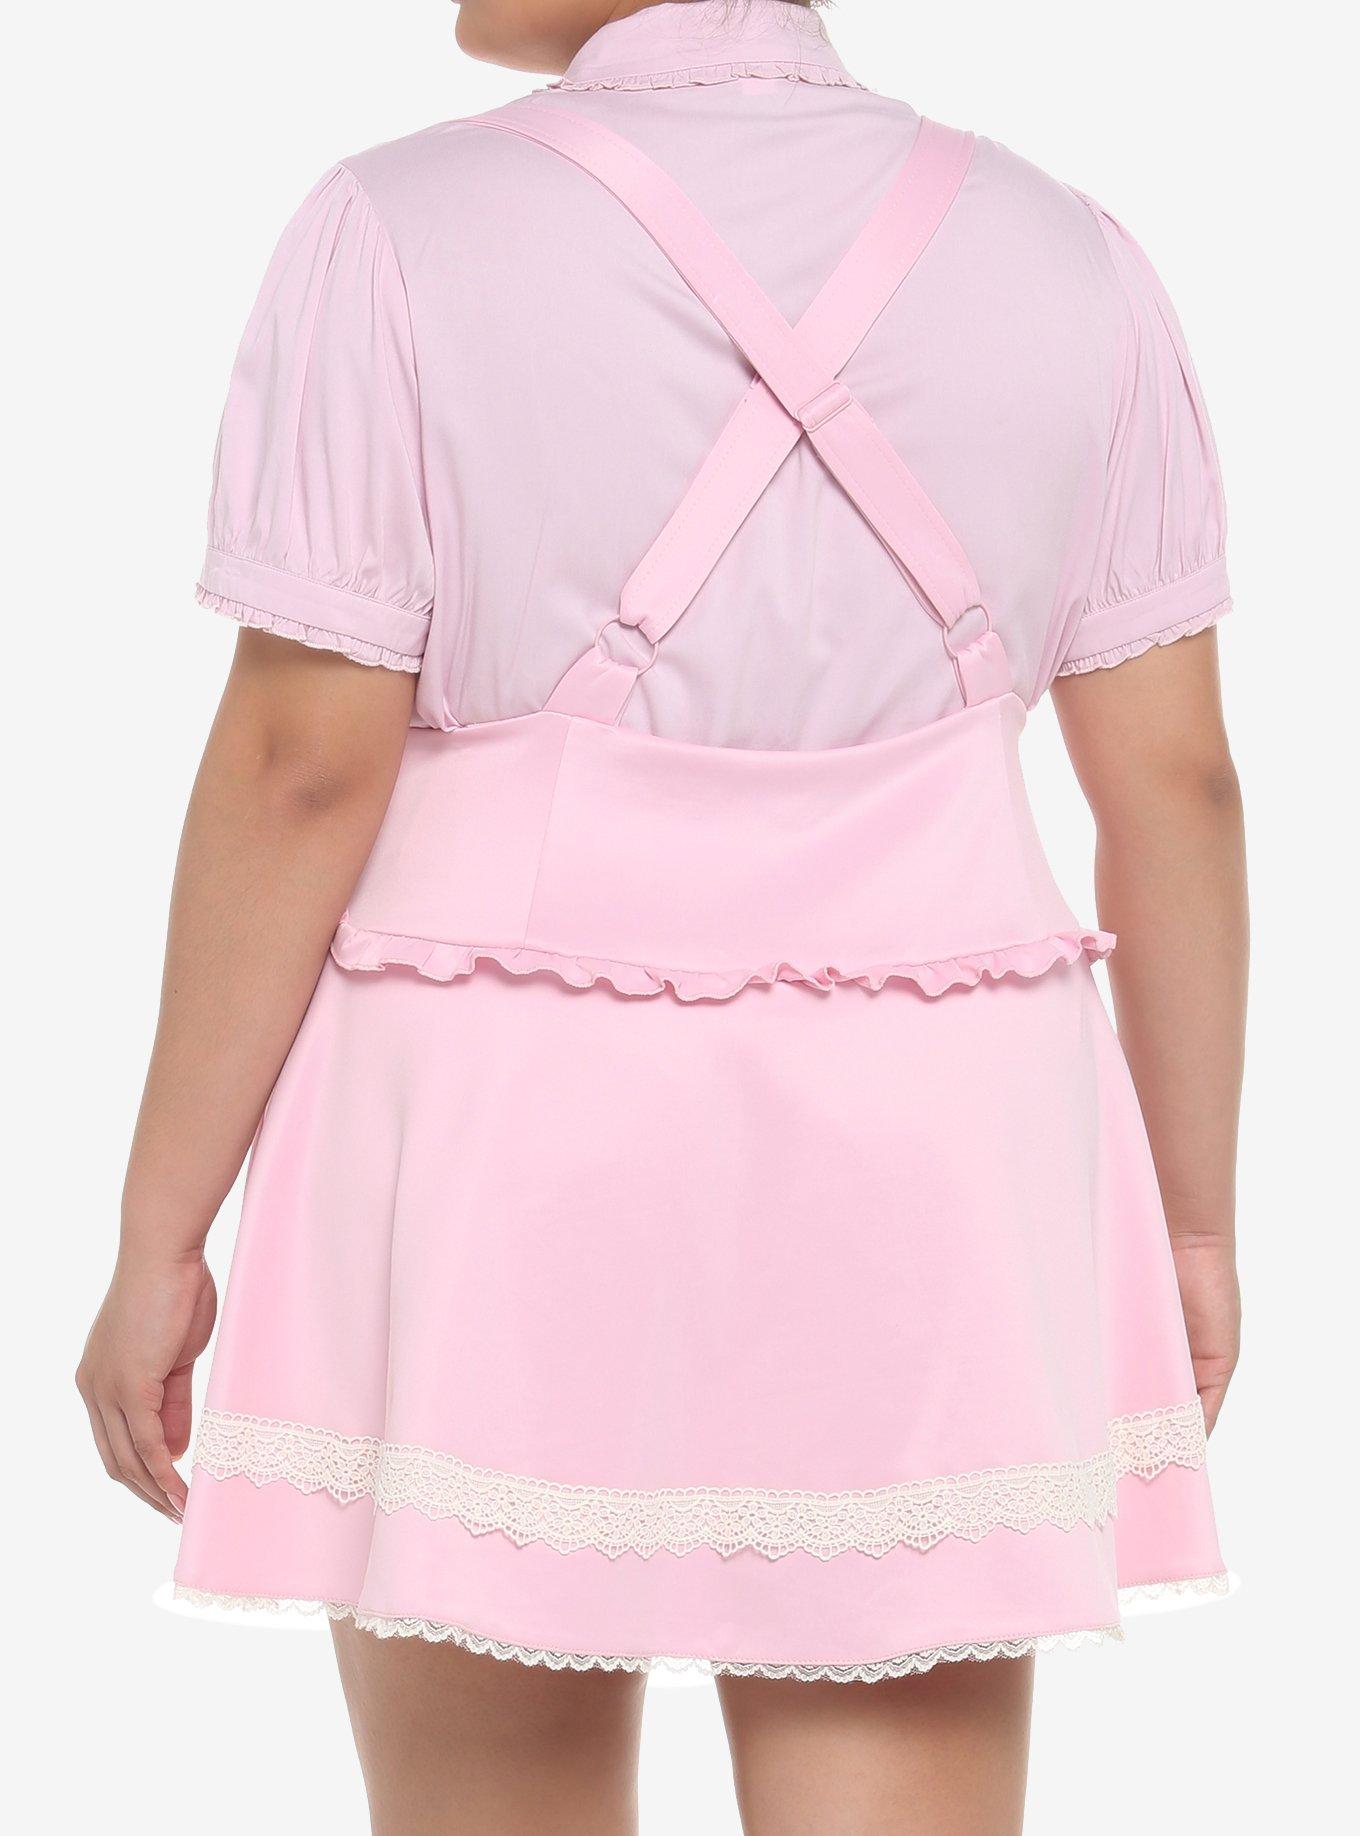 Pink Hearts & Lace Suspender Skirt Plus